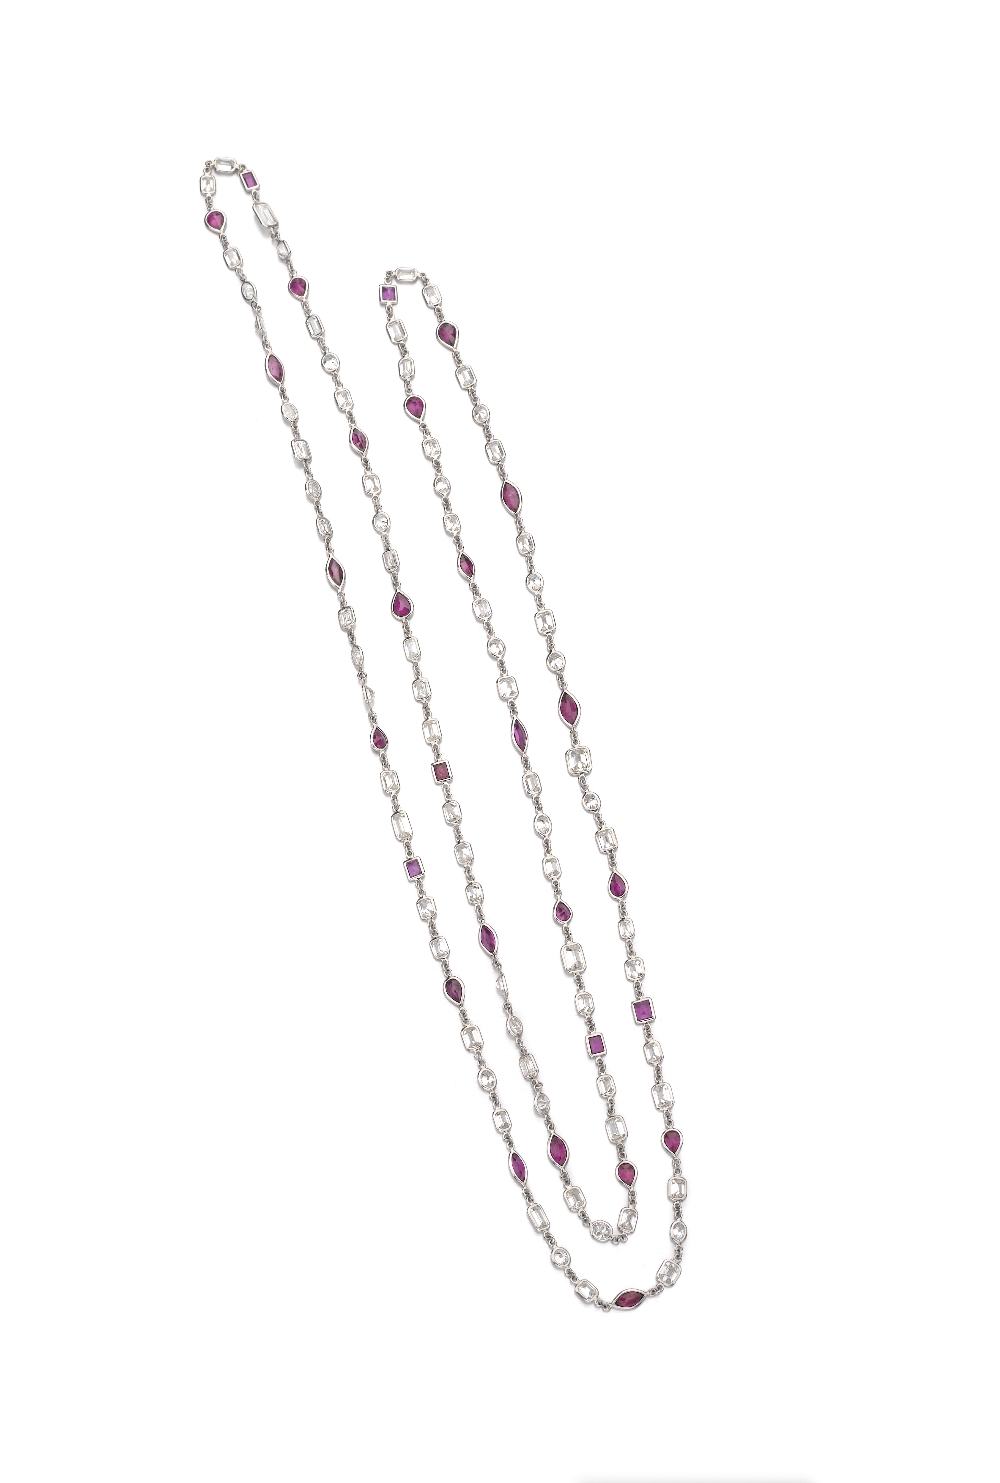 A Rare Diamond And Ruby Long Chain Necklace Designed as oval and emerald-cut diamonds and